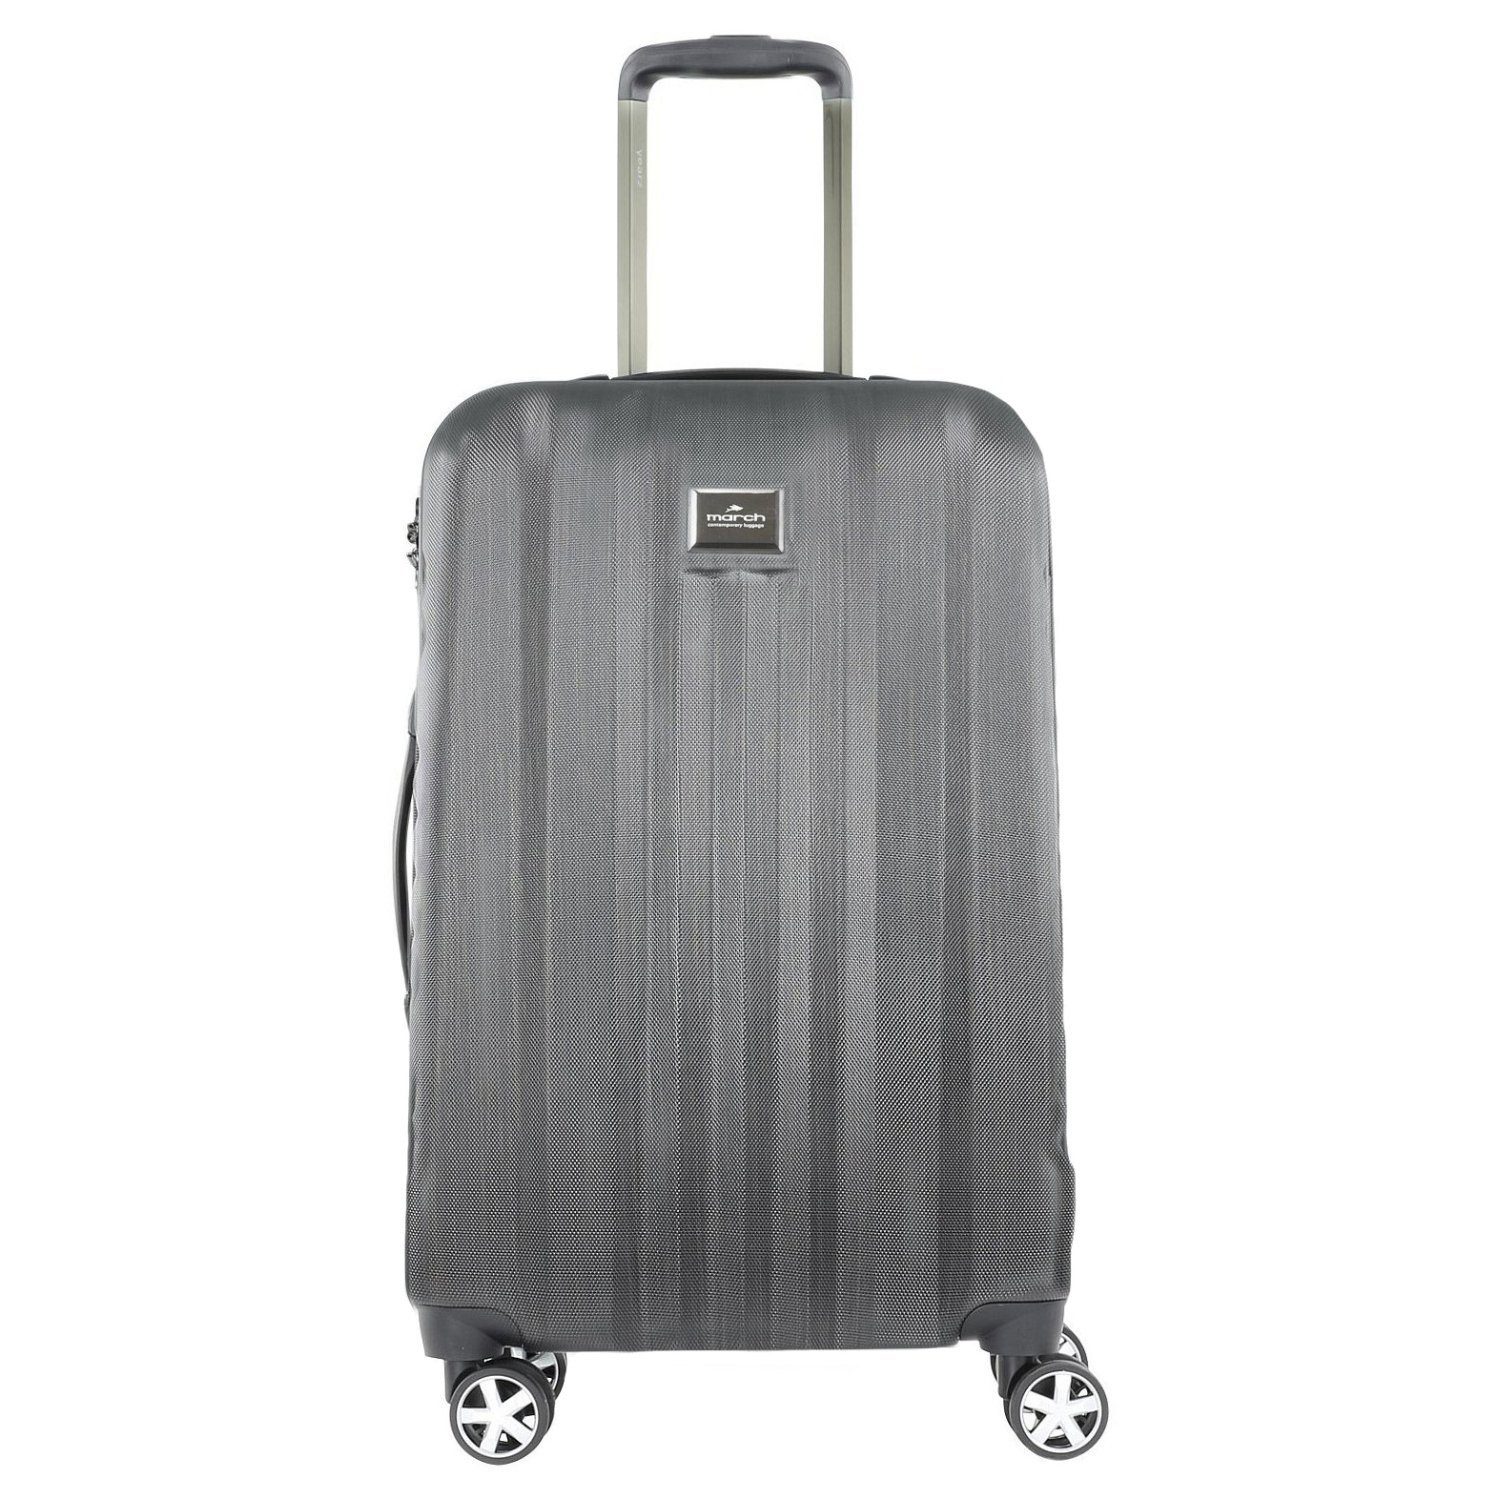 March15 Trading Rollen cm, Trolley 4-Rollen-Trolley bronze 4 - M 65 brushed brushed Fly